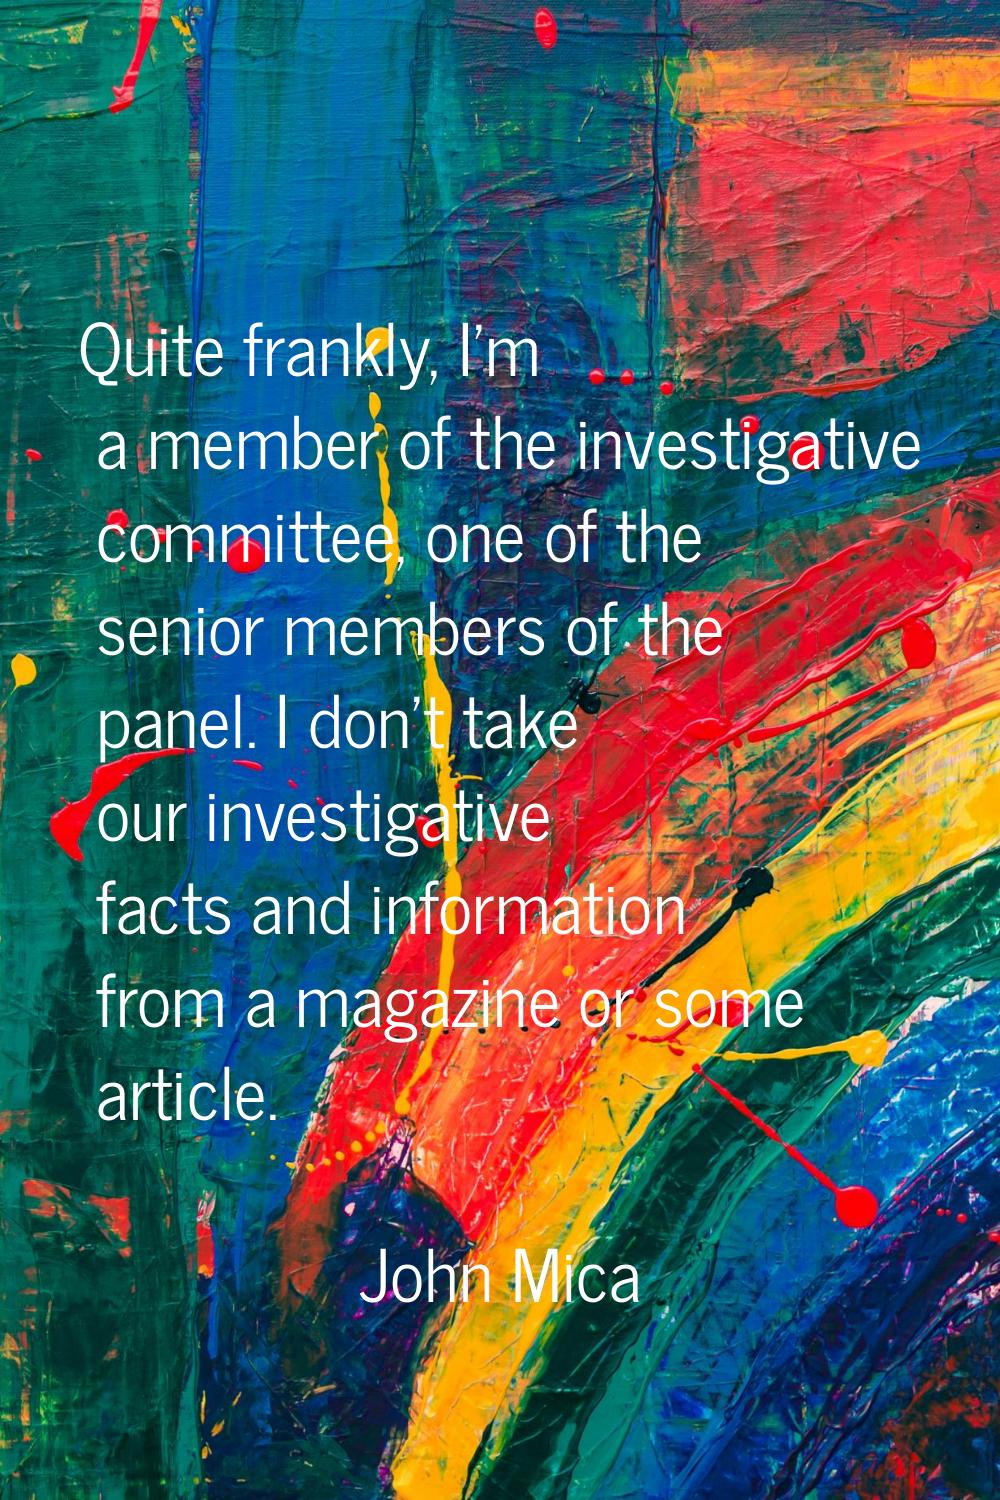 Quite frankly, I'm a member of the investigative committee, one of the senior members of the panel.